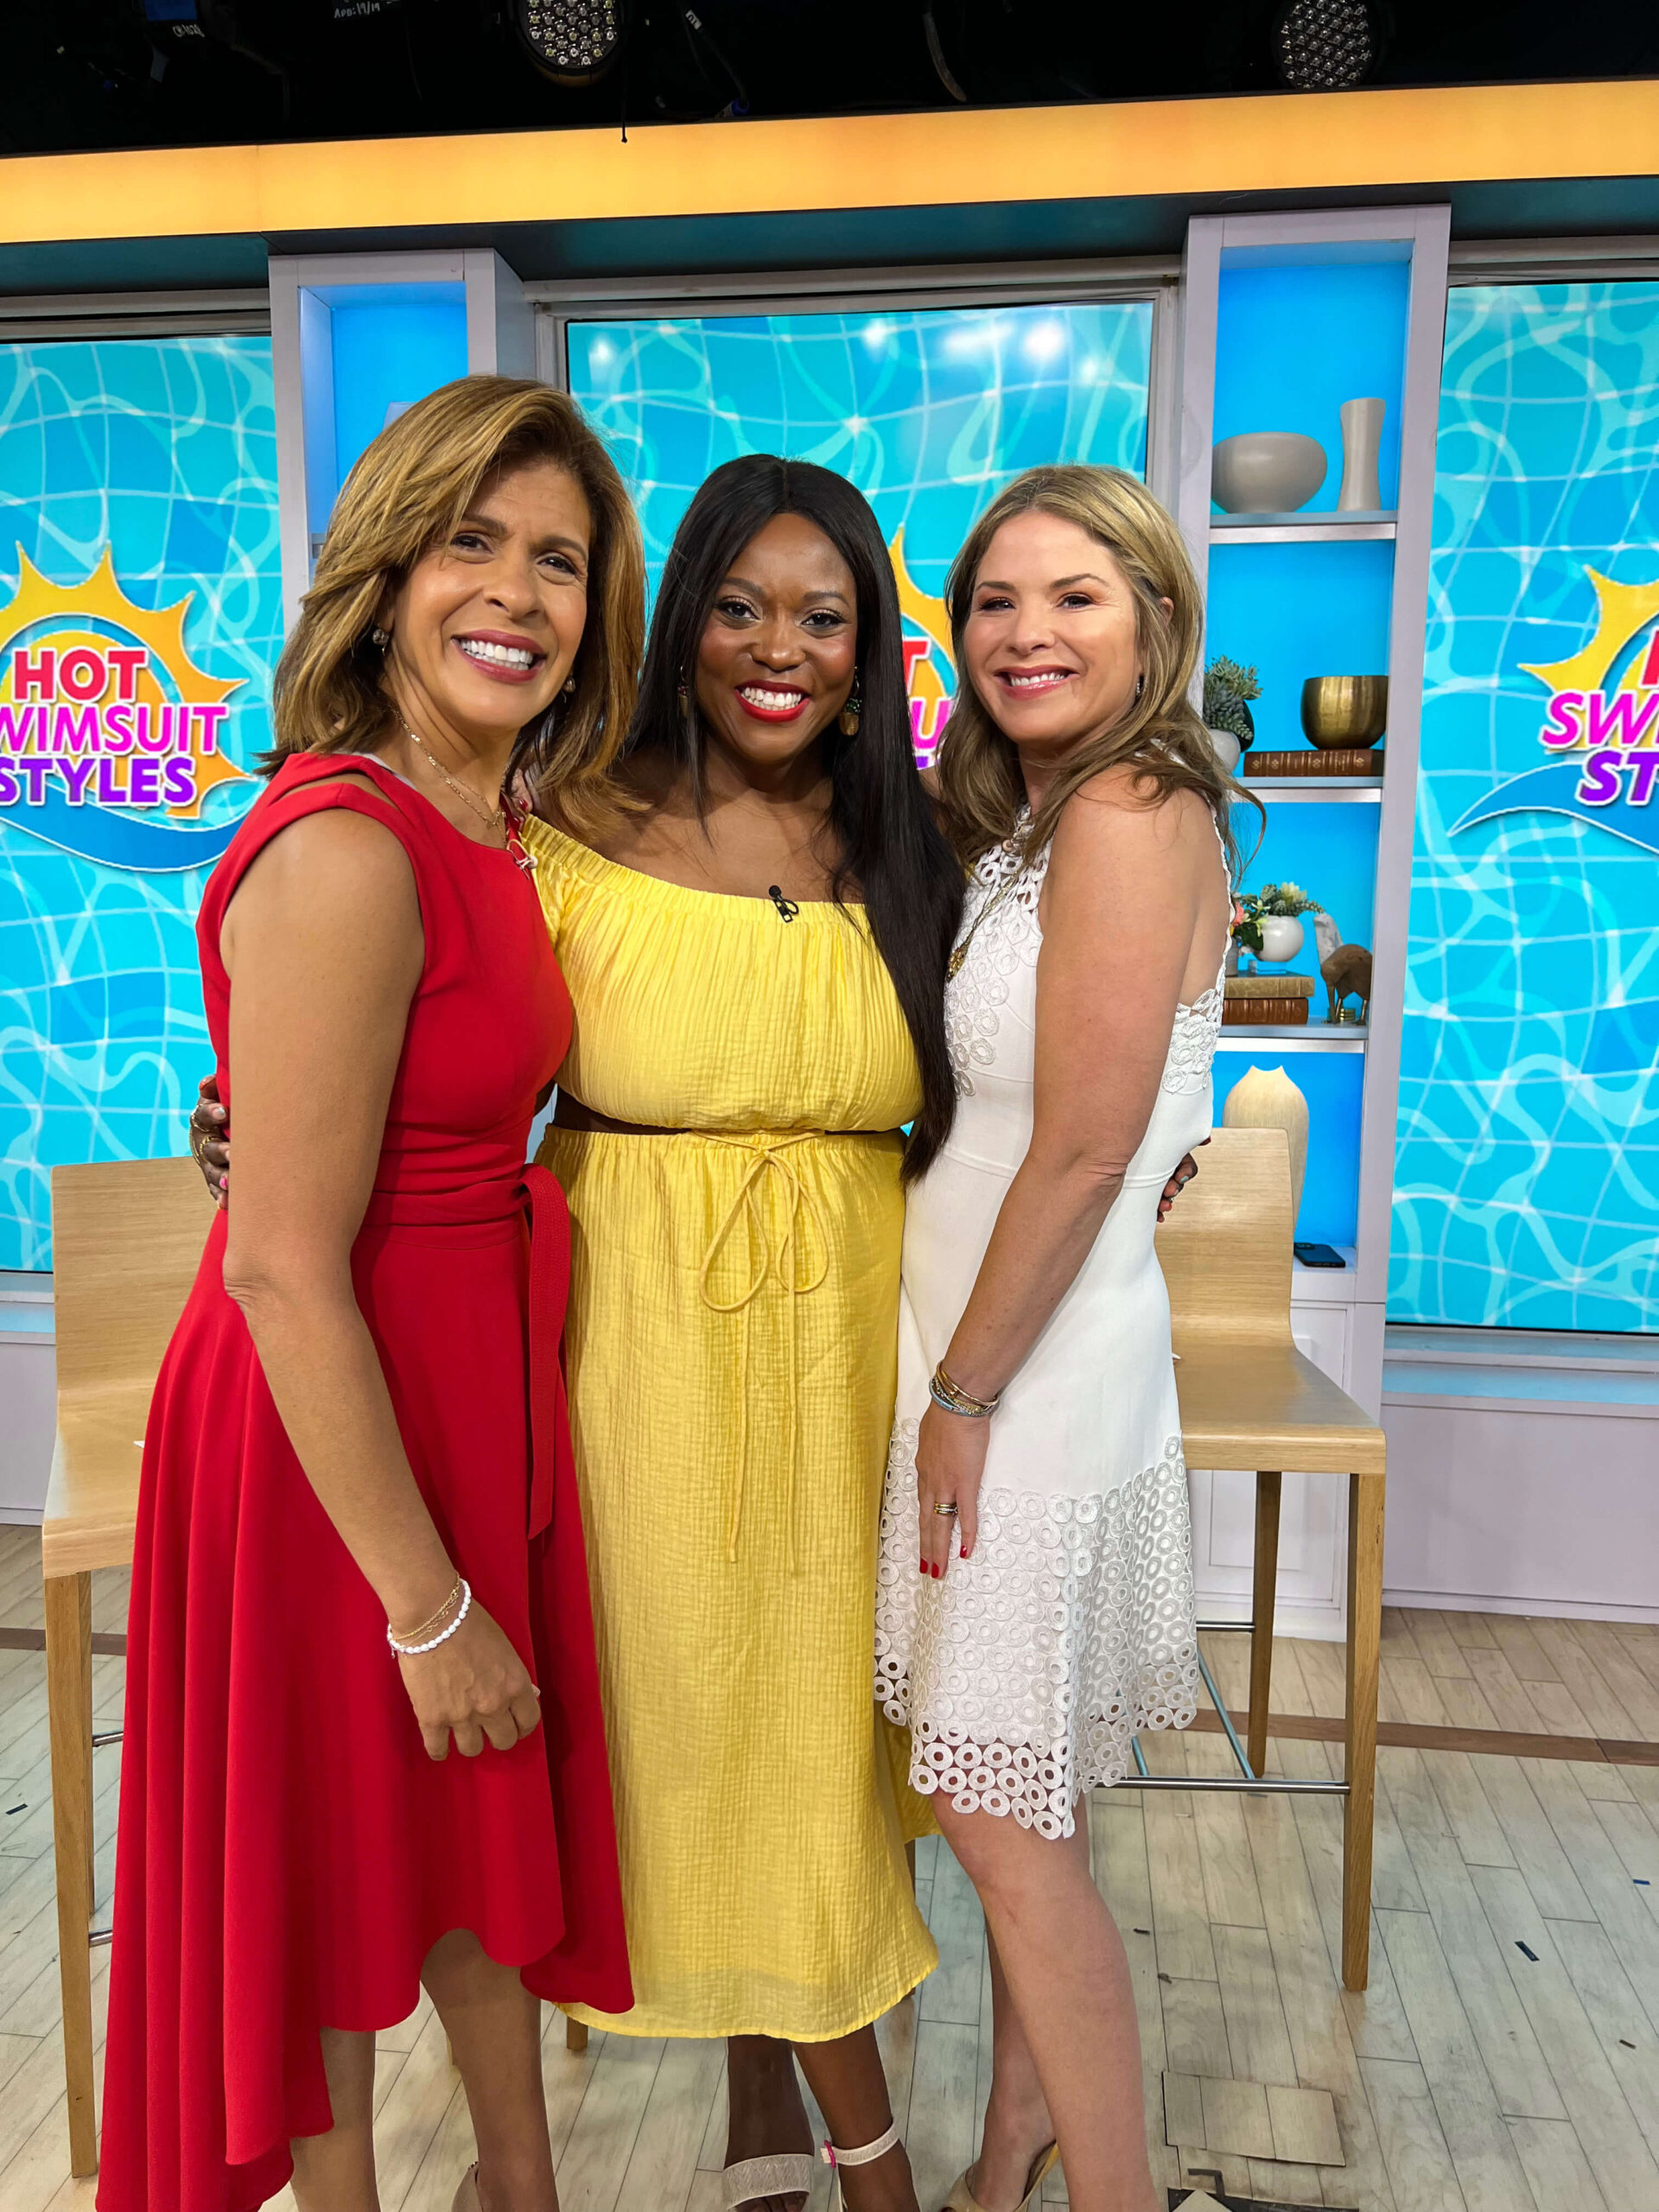 melissa chataigne swimsuit trends today hoda and jenna